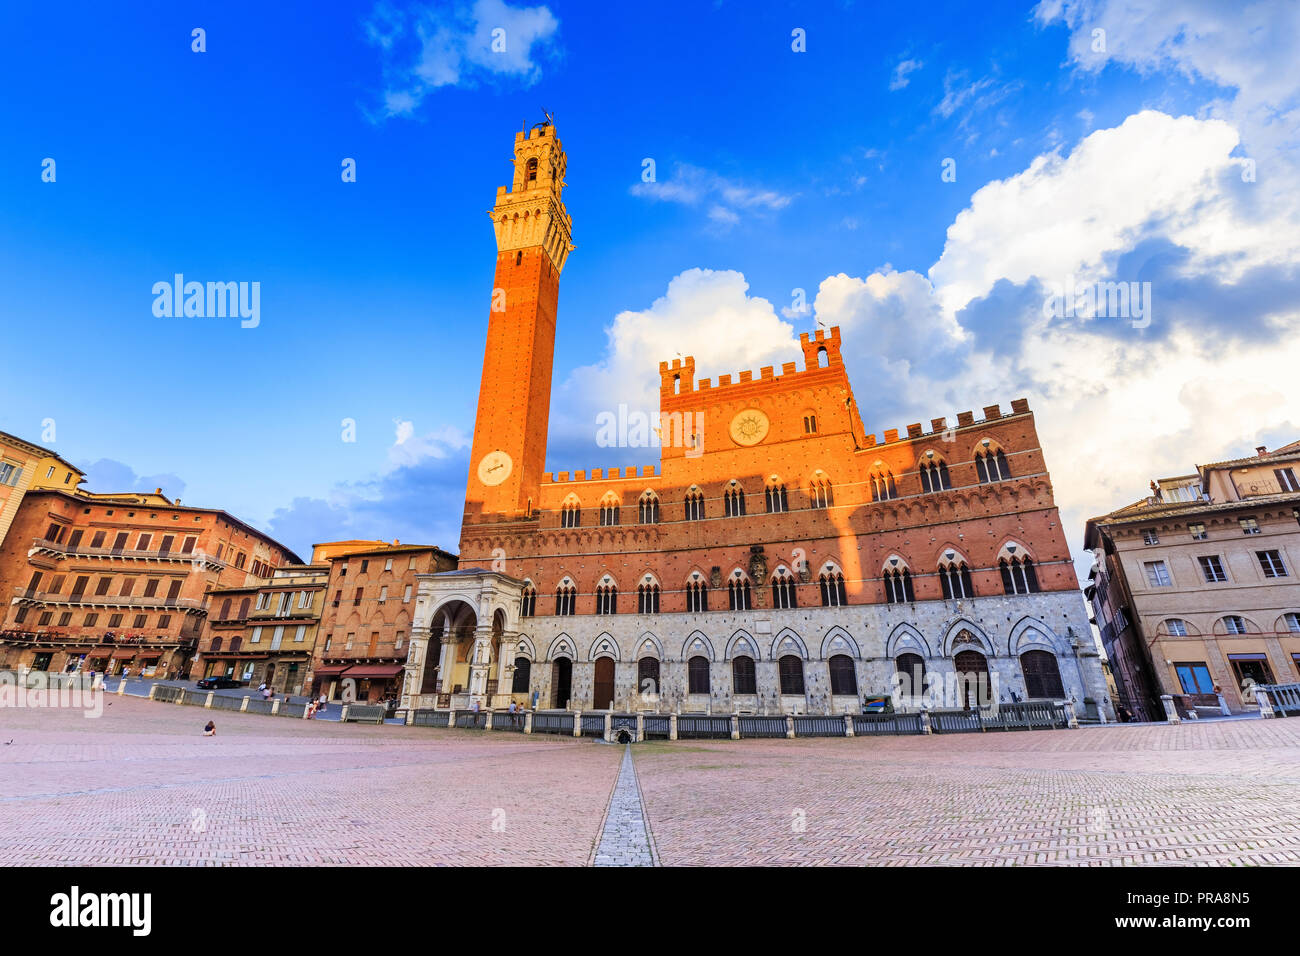 Siena, Italy. Palazzo Publico and Piazza del Campo at sunset. Stock Photo